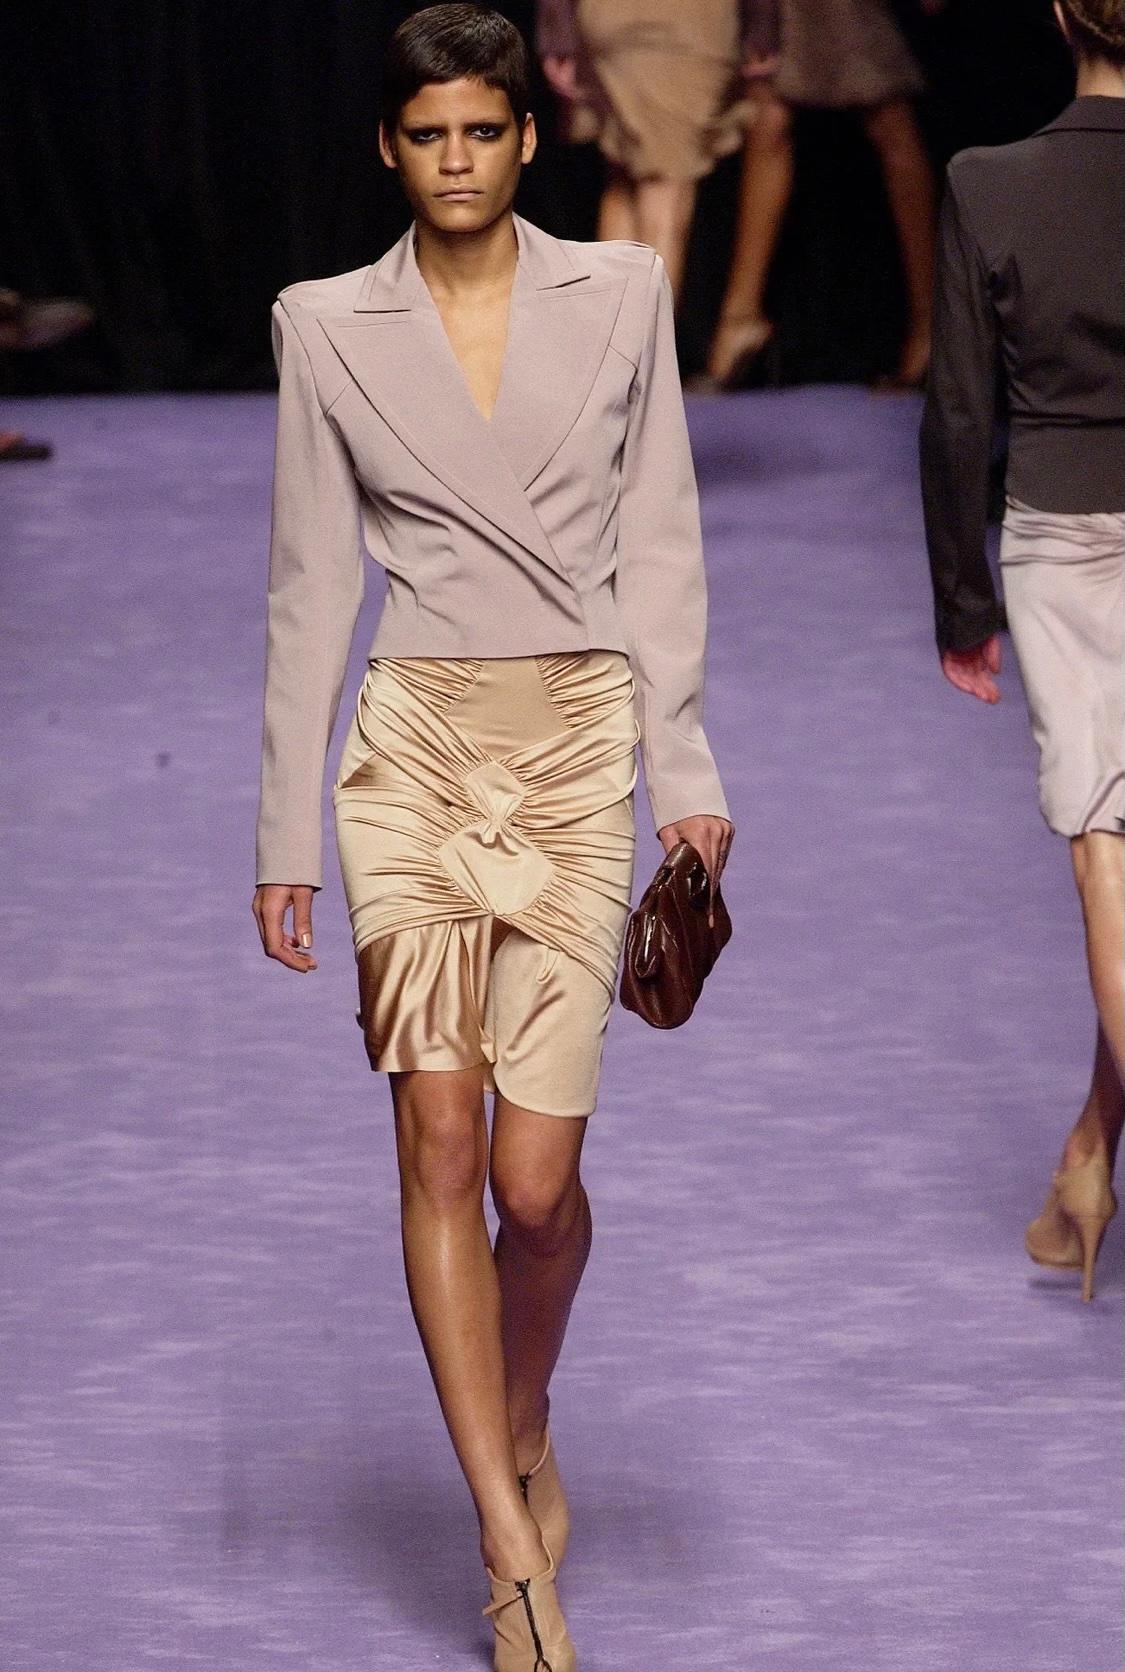 Presenting a black stretch viscose blend skirt designed by Tom Ford for Yves Saint Laurent Rive Gauche's Spring/Summer 2003 collection. The beige/taupe version of this skirt debuted on the season's runway as part of look 3 on Omahyra Mota and in a